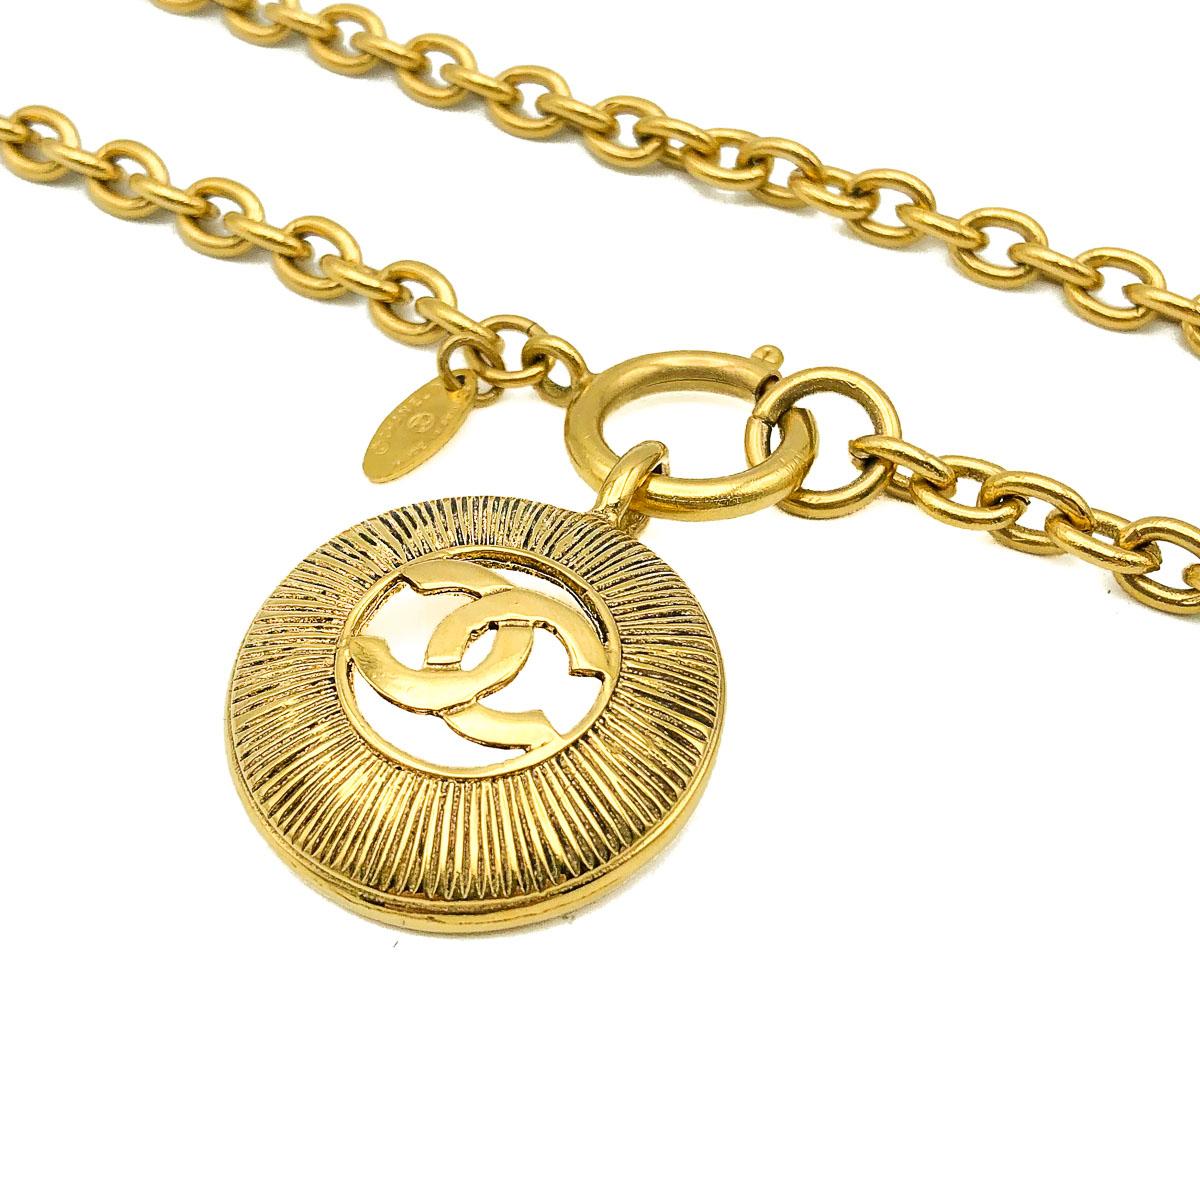 An utterly iconic Vintage Chanel Sunburst Necklace. Crafted in gold plated metal. In very good vintage condition with only very very light wear to the gold plating on the chain - unnoticeable when worn. Signed. Approx. 58cms chain. A classically